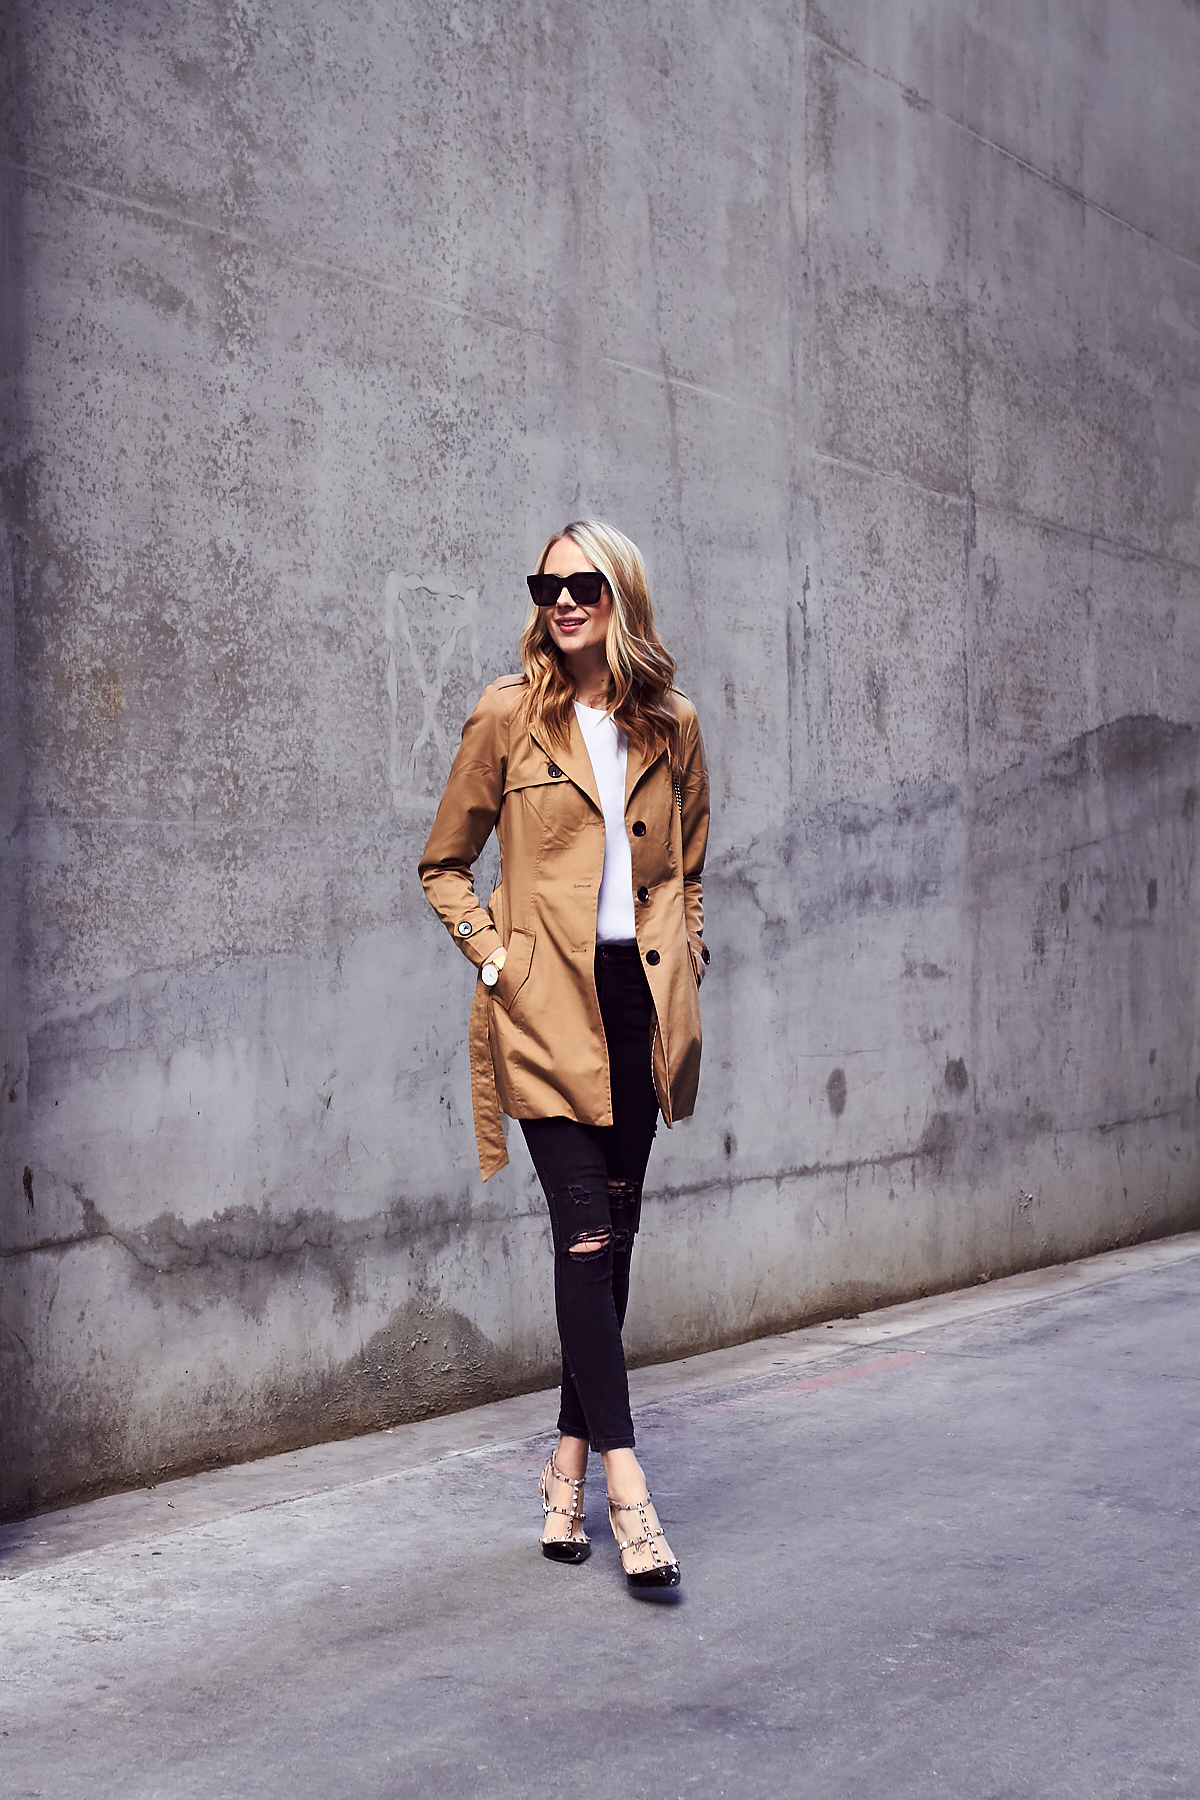 Fall Outfit, Spring Outfit, Trench Coat, Black Ripped Skinny Jeans, Valentino Rockstud Pumps